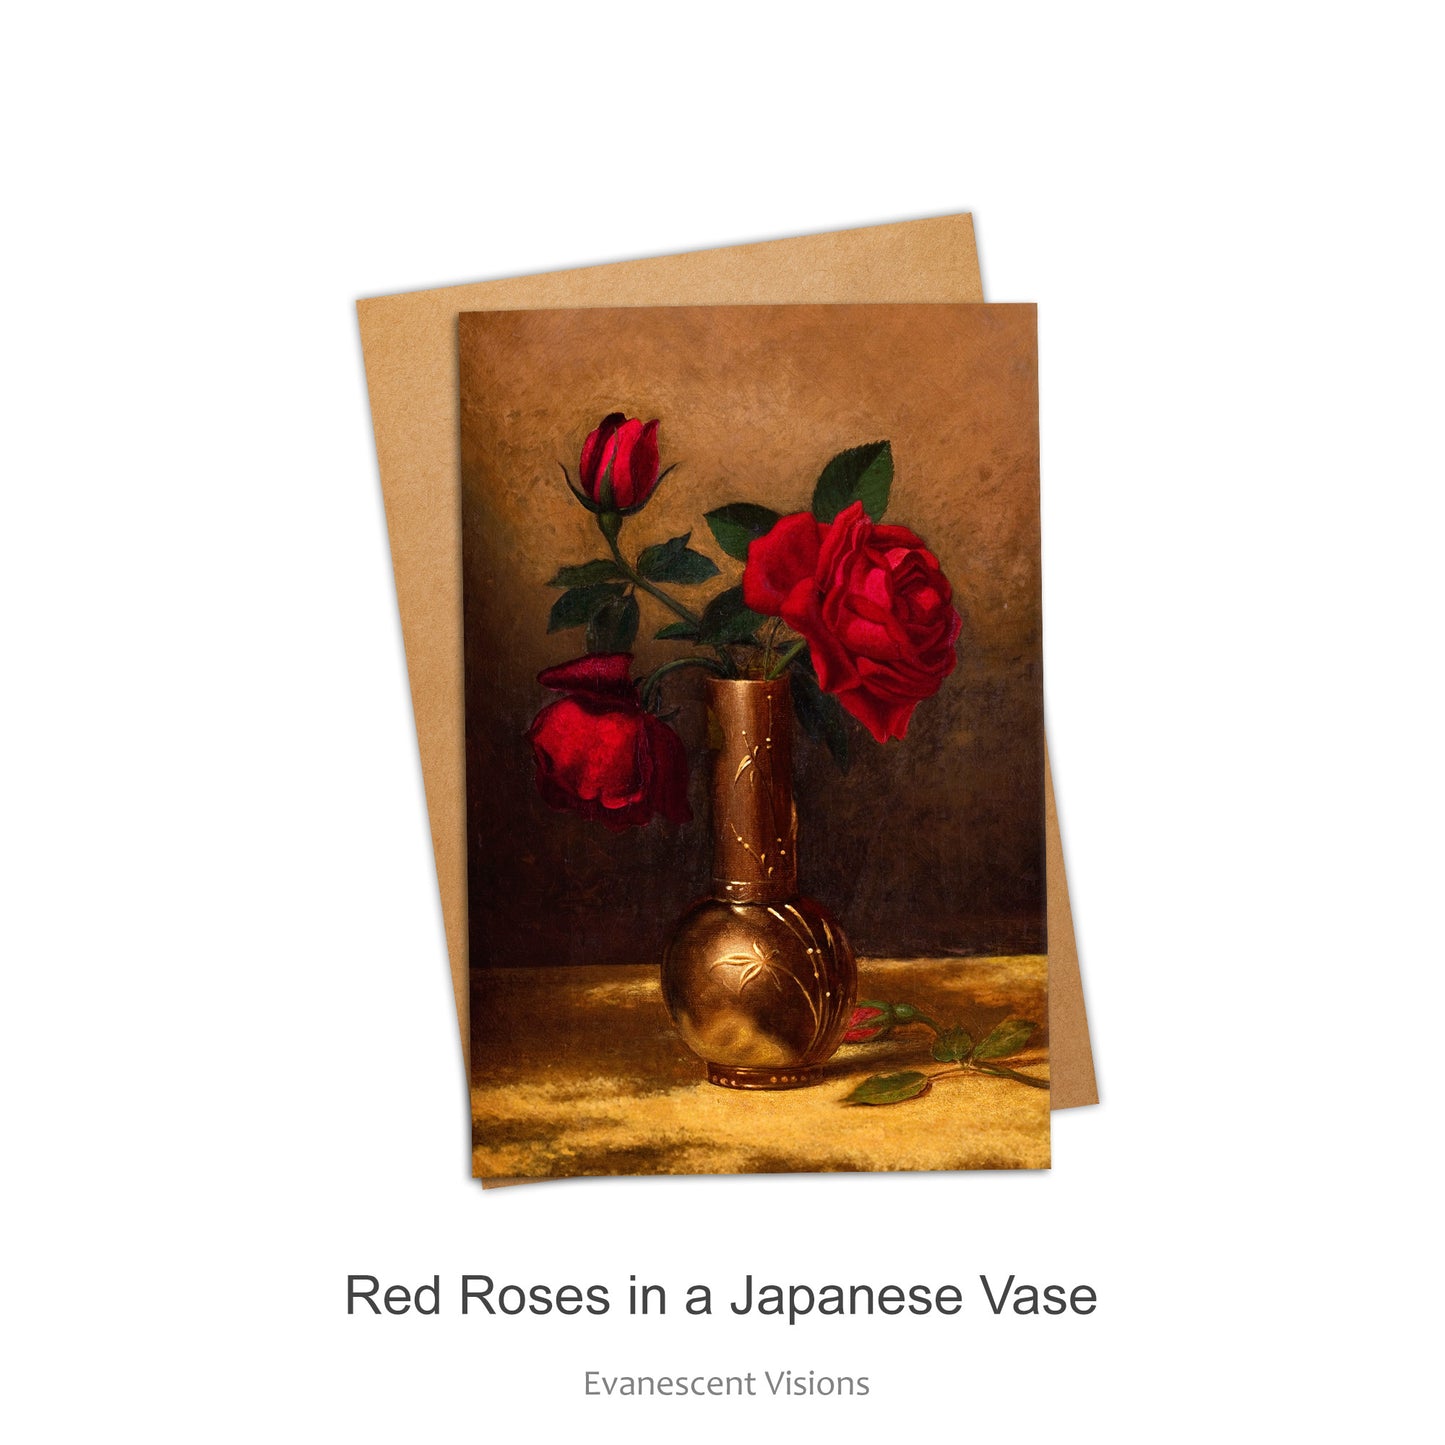 Red Roses Art Greeting Card with design 'Red Roses in a Japanese Vase'.